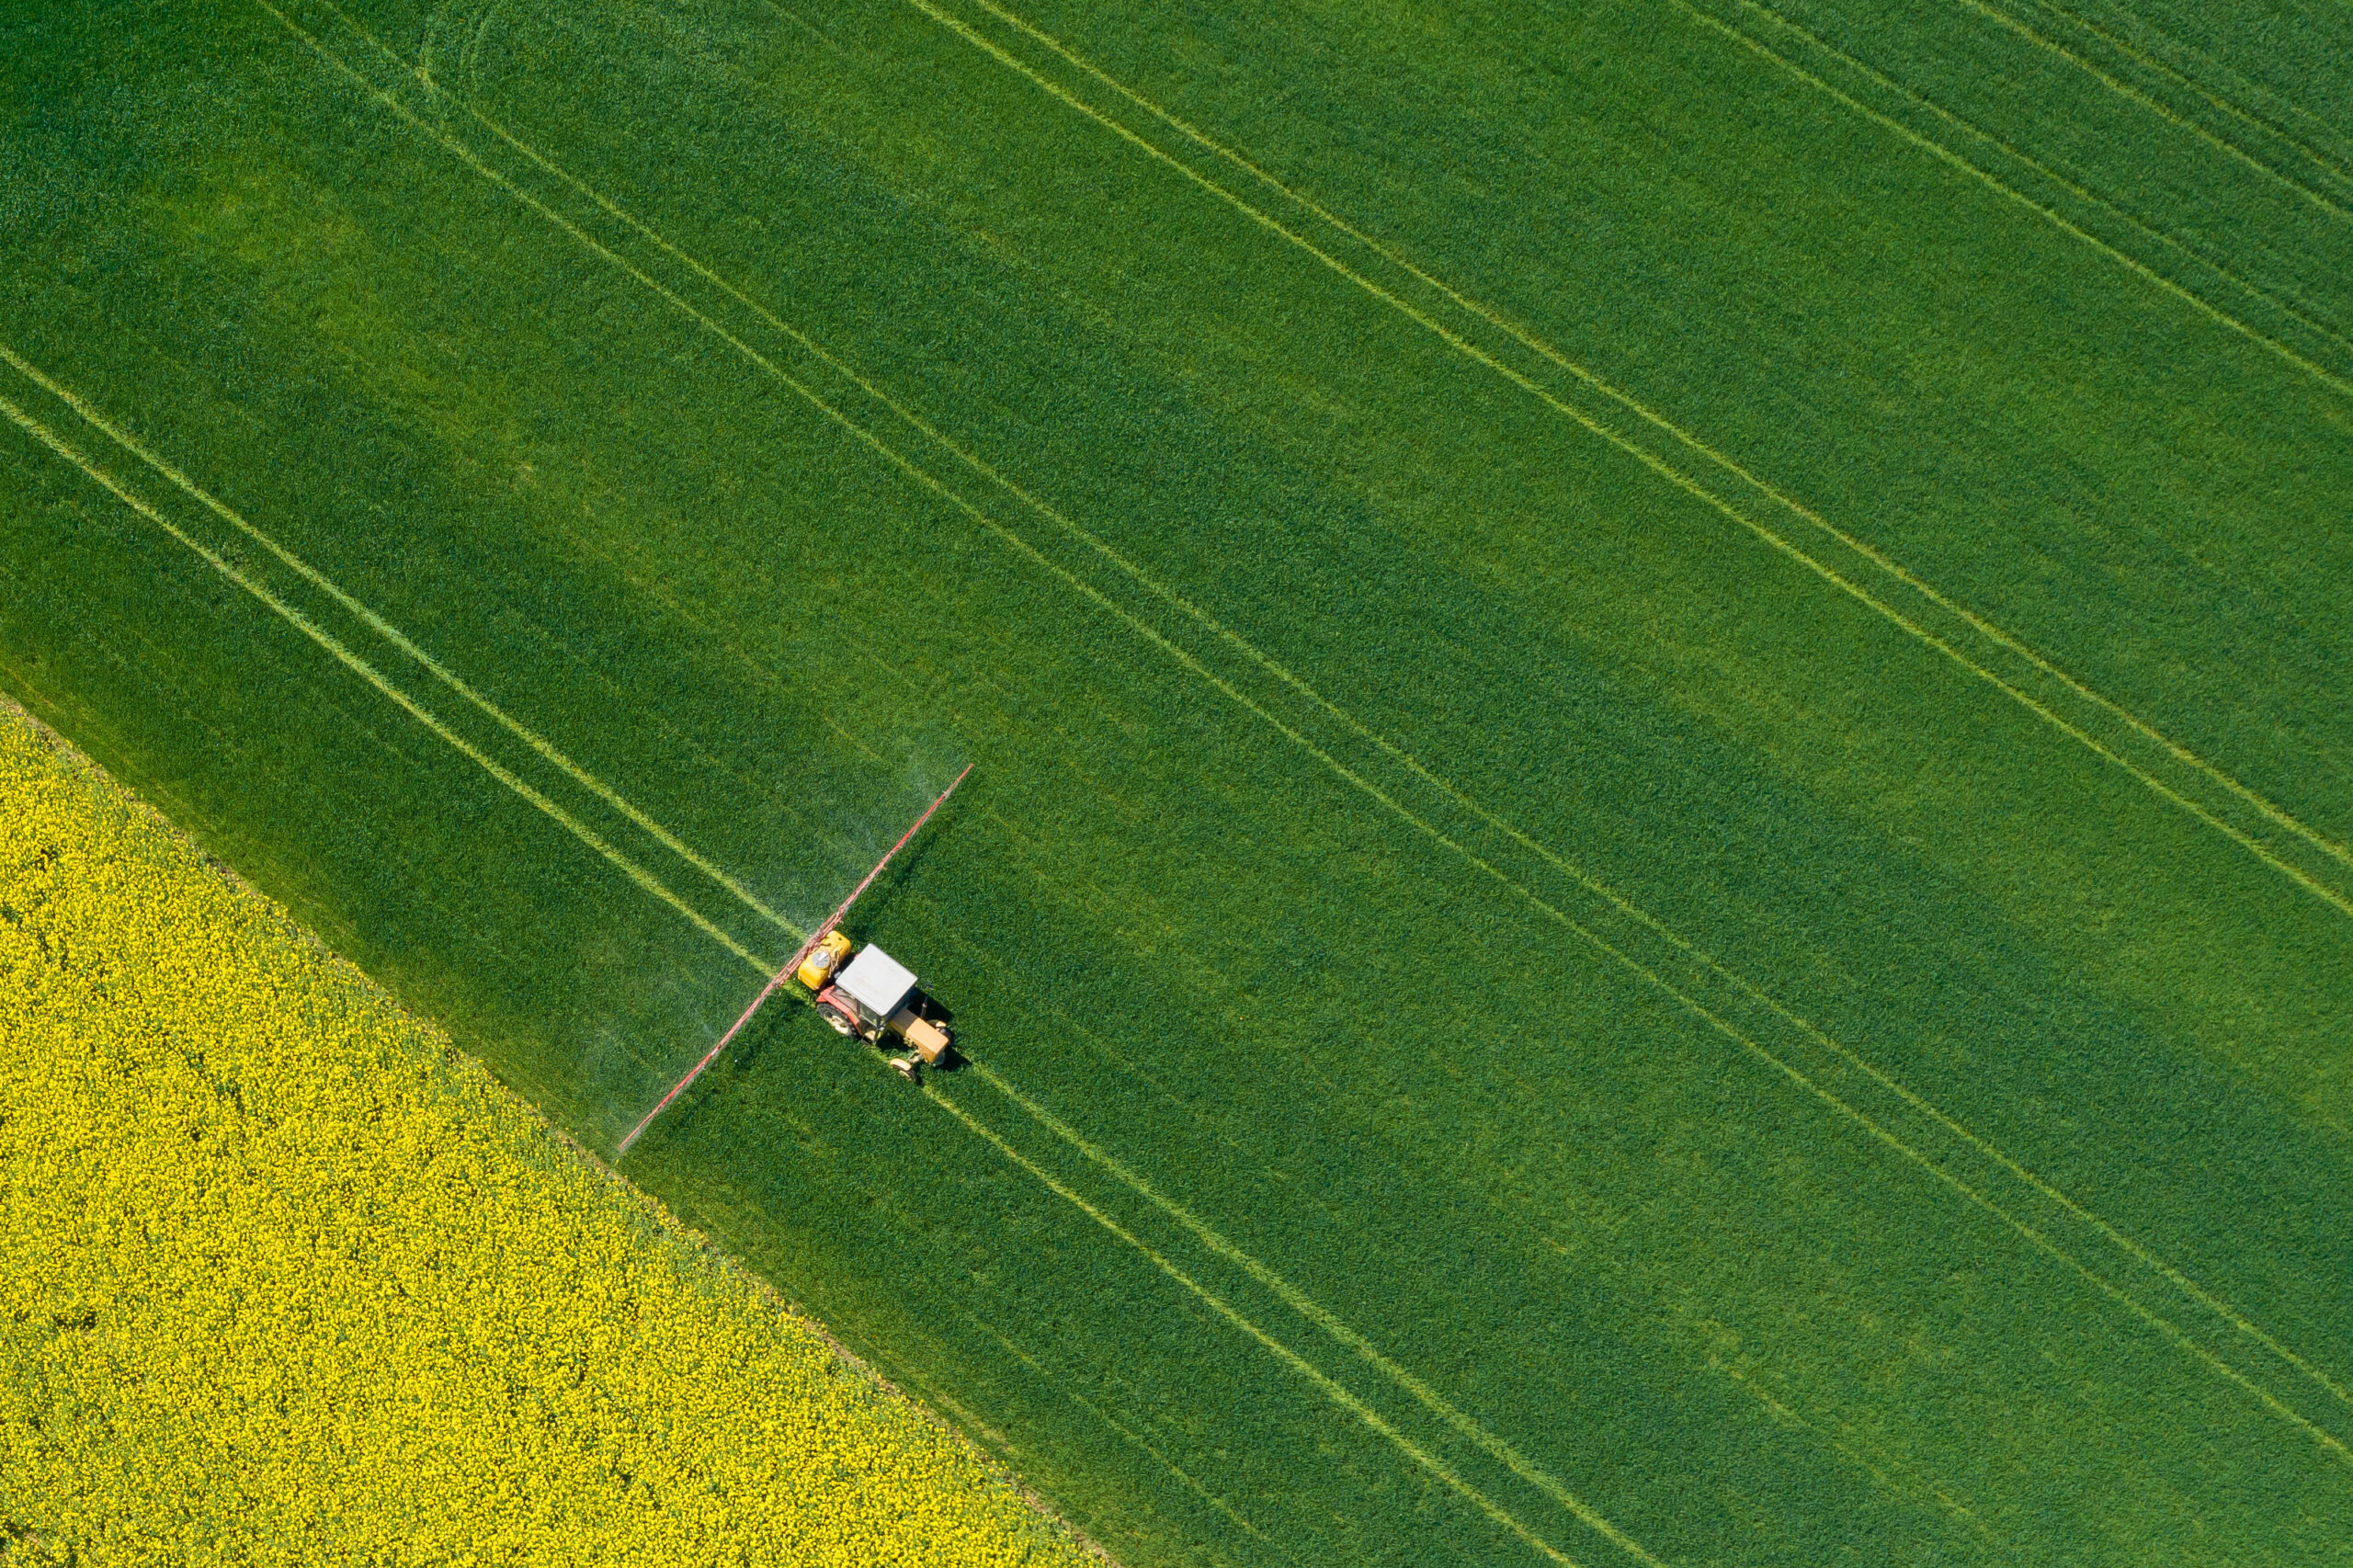 Aerial view of farming tractor plowing and spraying on field.  Agriculture. View from above. Photo captured with drone.